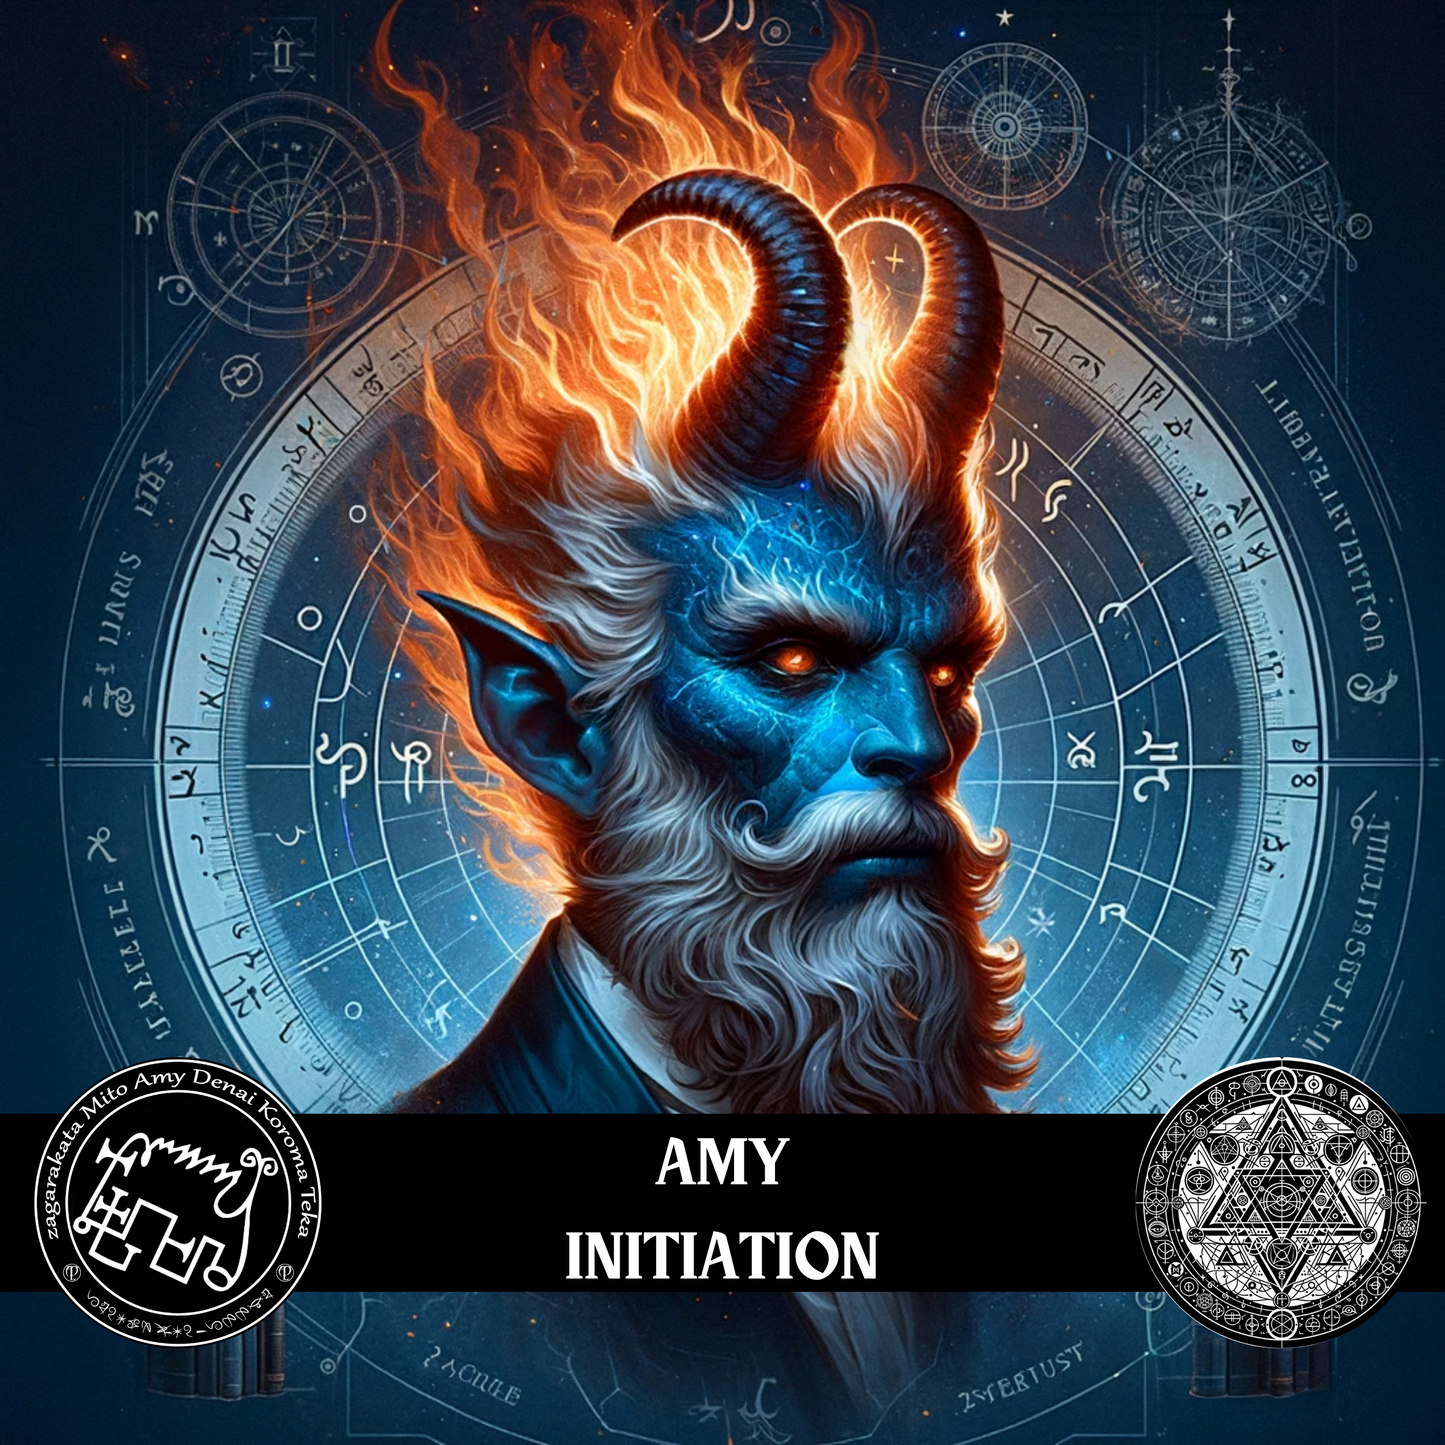 Initiation Pact with Demon Amy